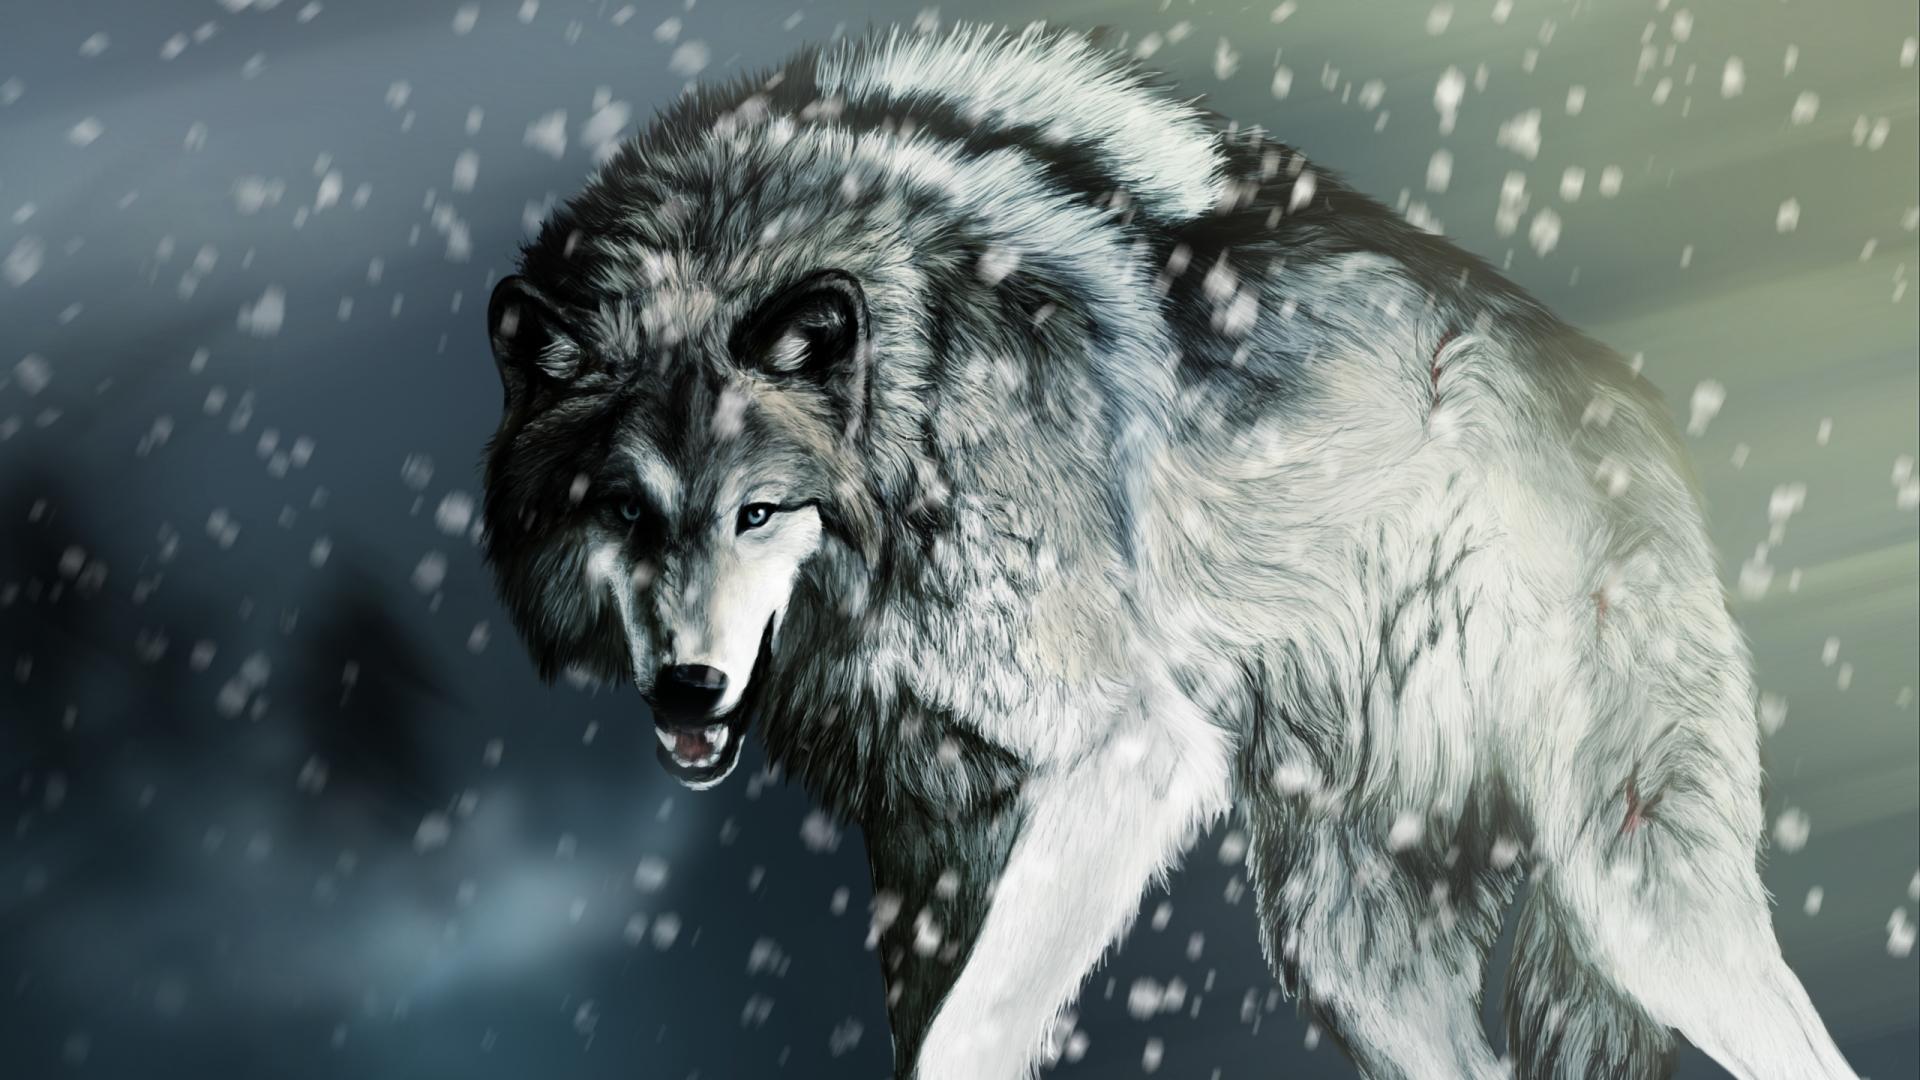 Free download Cool Wolf Backgrounds [1920x1080] for your Desktop, Mobile &  Tablet | Explore 73+ Wolf Backgrounds | Wolf Wallpapers, Timber Wolf  Wallpaper, Hd Wolf Wallpaper